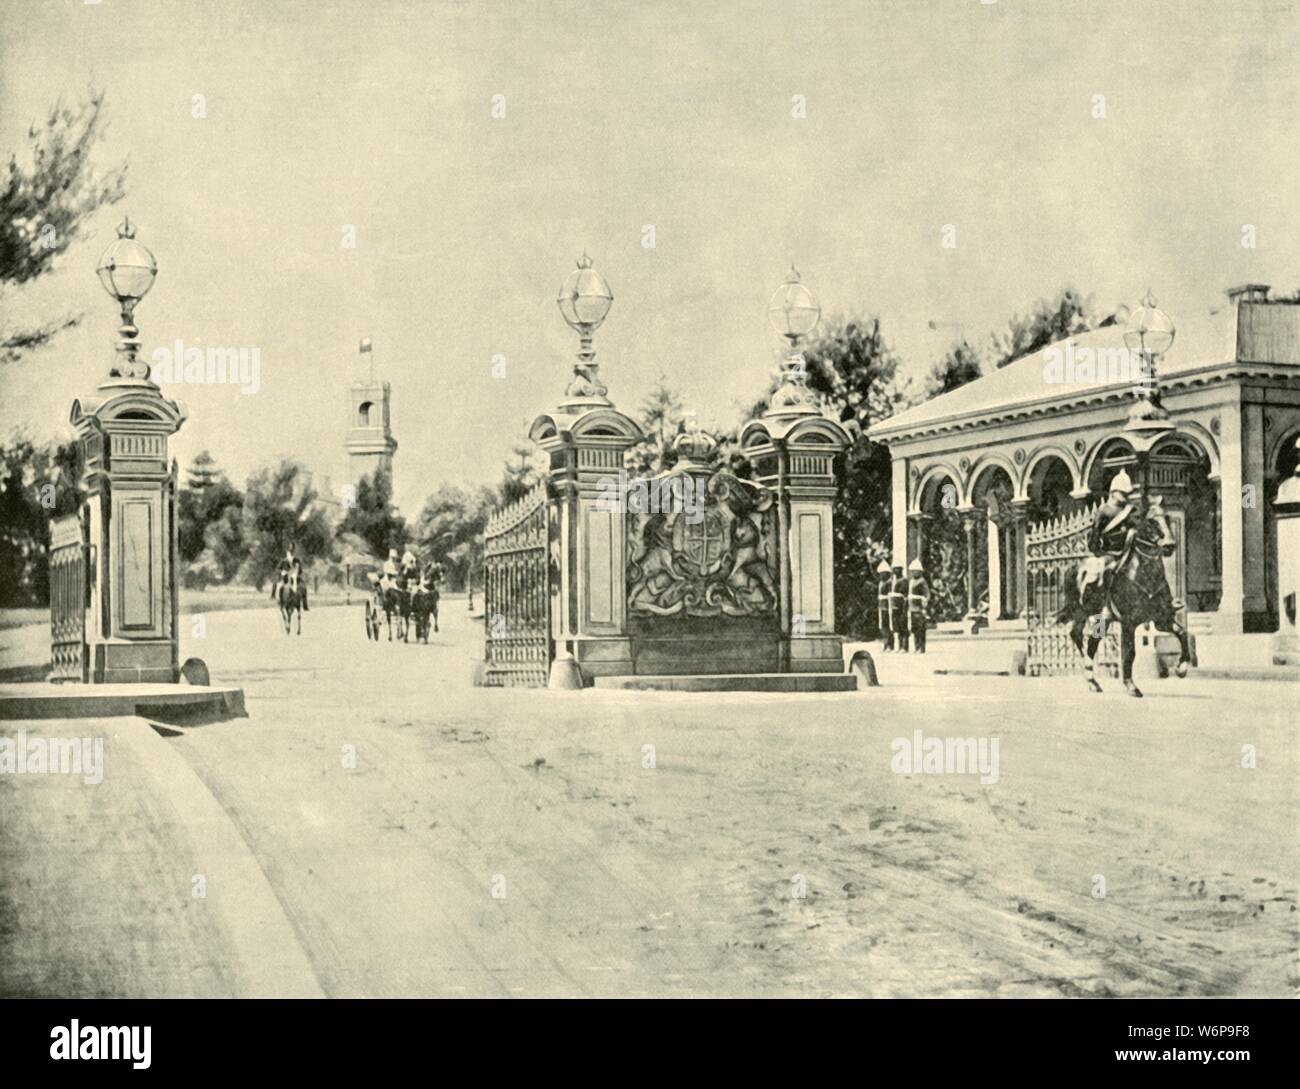 'Entrance to Government House, Melbourne', 1901. Government House was opened in 1876, on land that originally been set aside in 1841. Designed by William Wardell in the Italianate style. From &quot;Federated Australia&quot;. [The Werner Company, London, 1901] Stock Photo